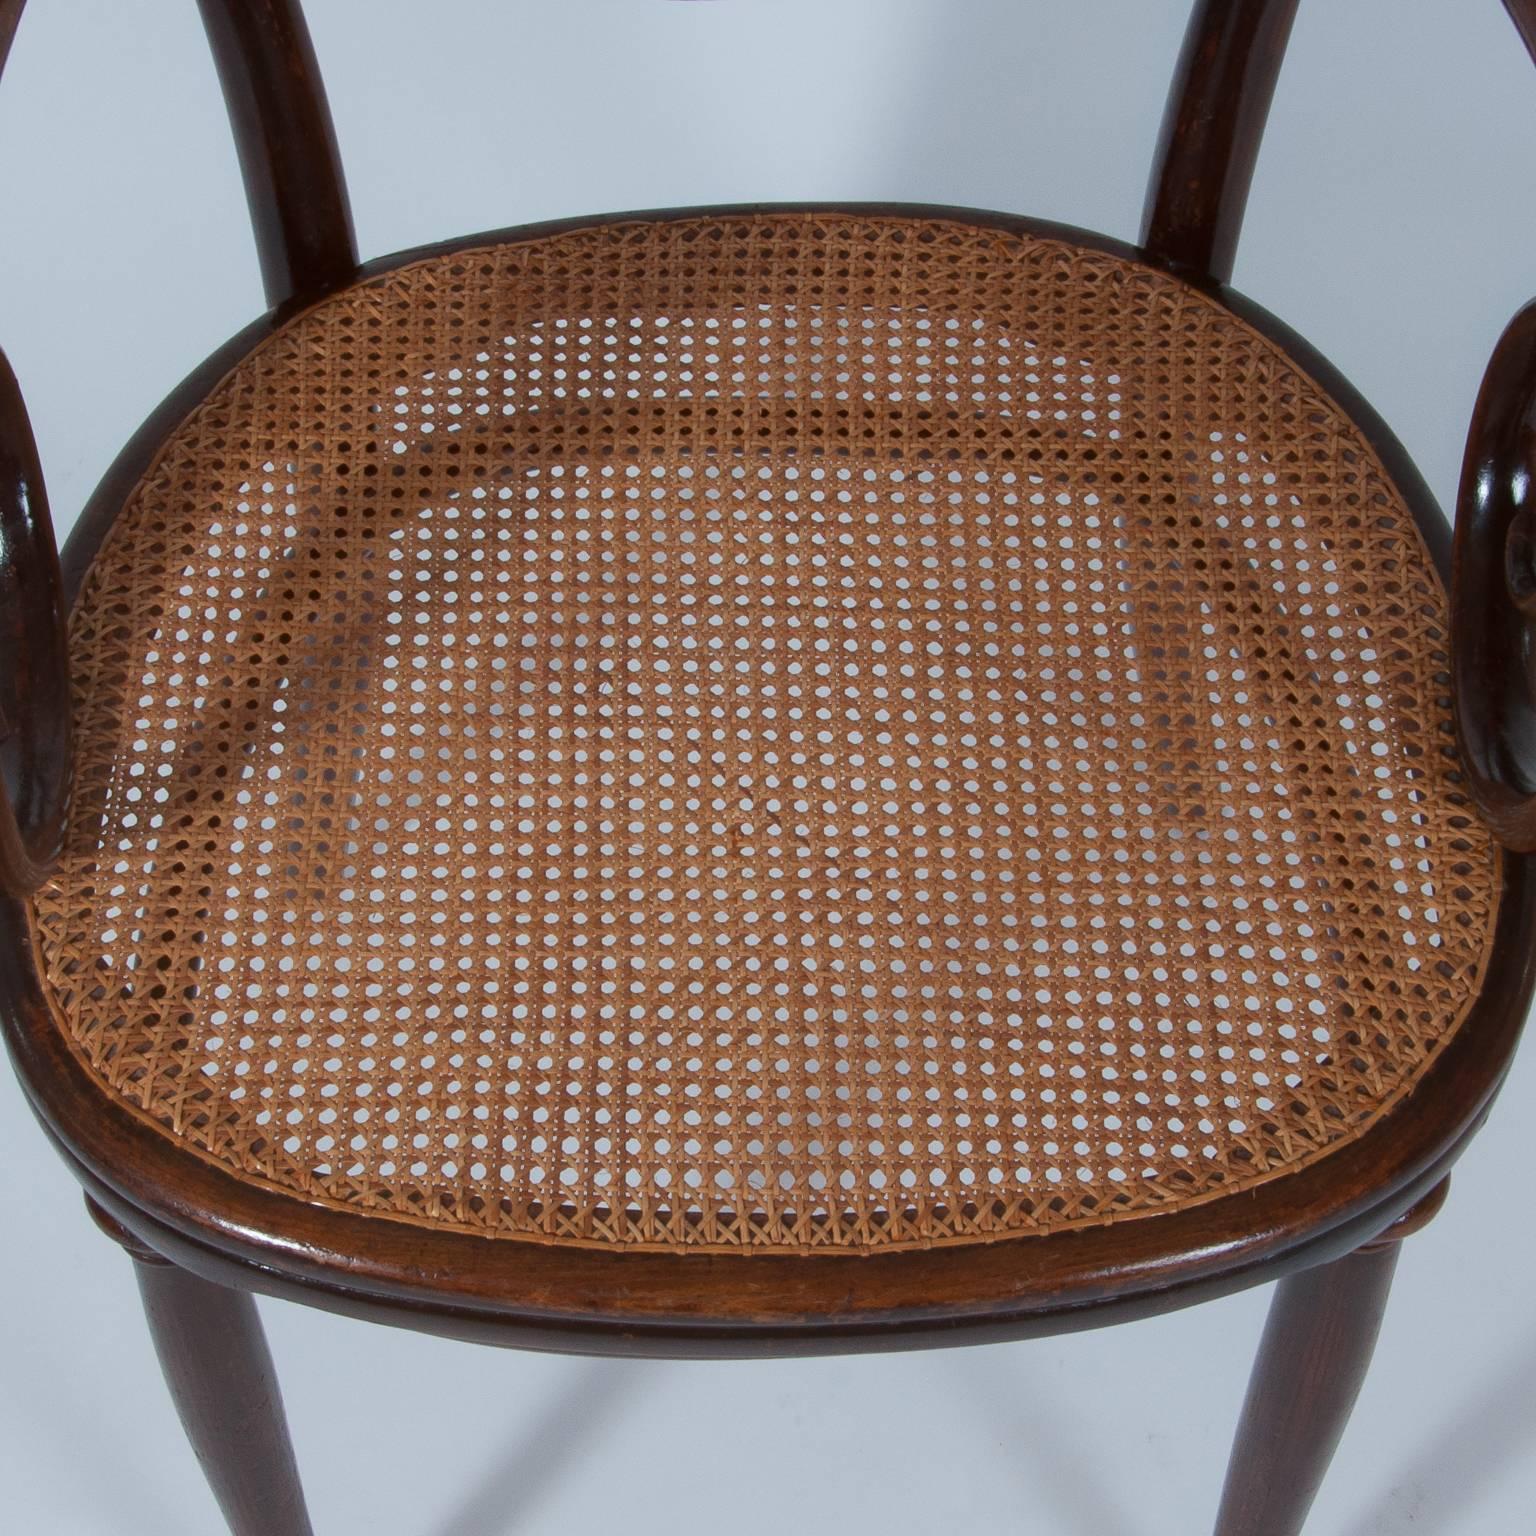 Antique Thonet Bentwood Armchair Fauteuil No. 2, desgned 1865, manufactured 1895 In Excellent Condition For Sale In Vienna, AT